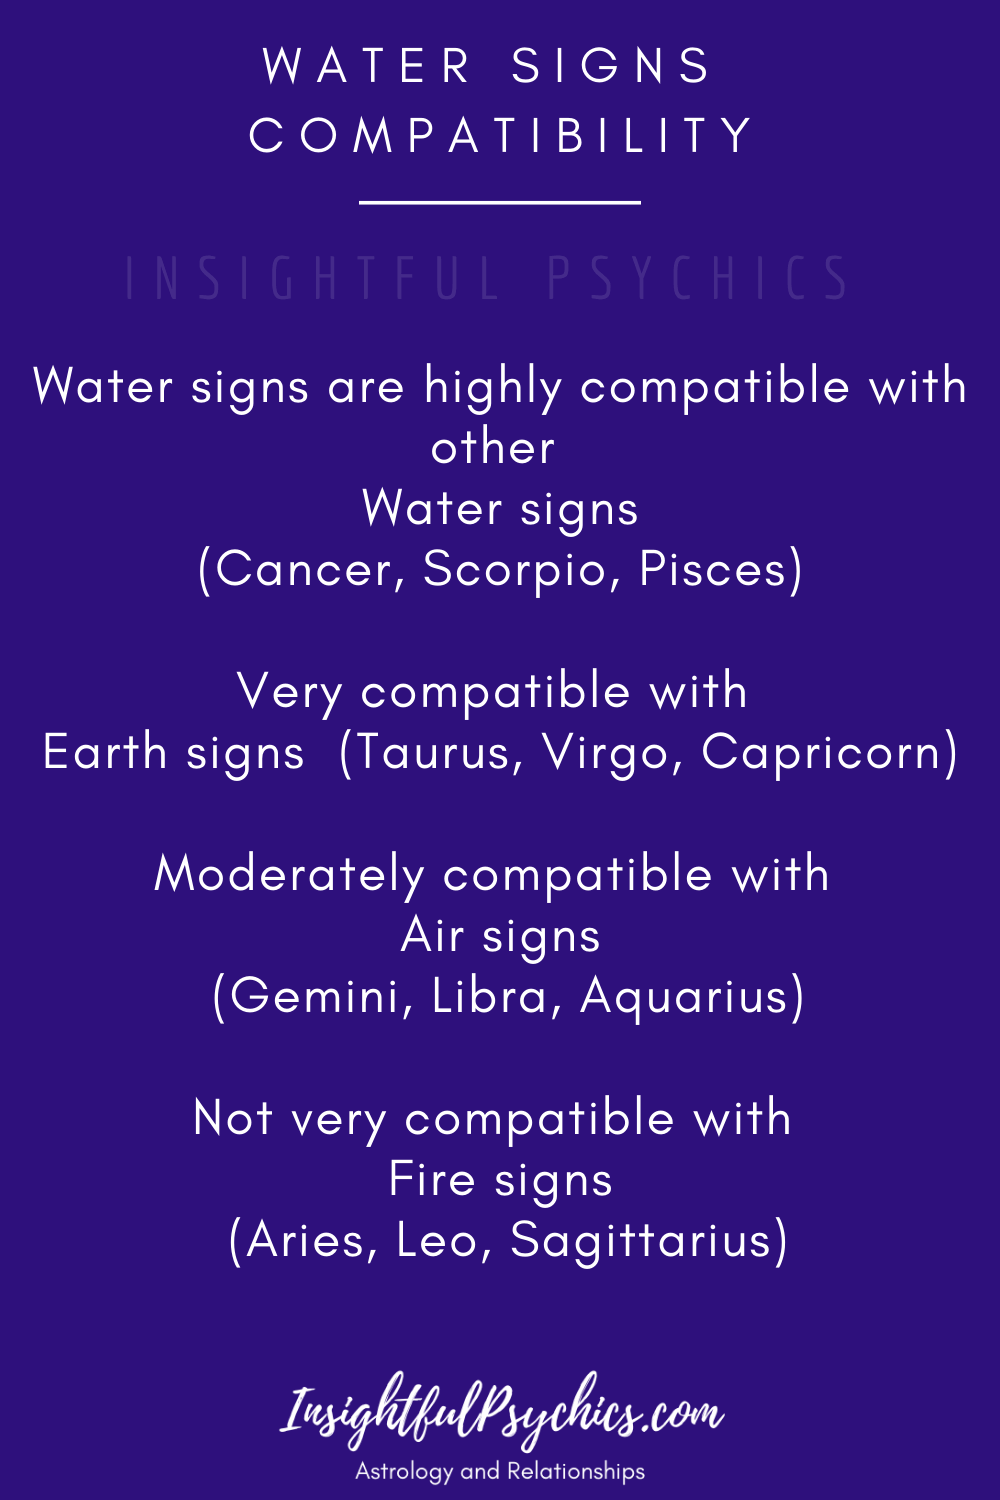 The Water Signs of the Zodiac: Cancer, Scorpio, and Pisces